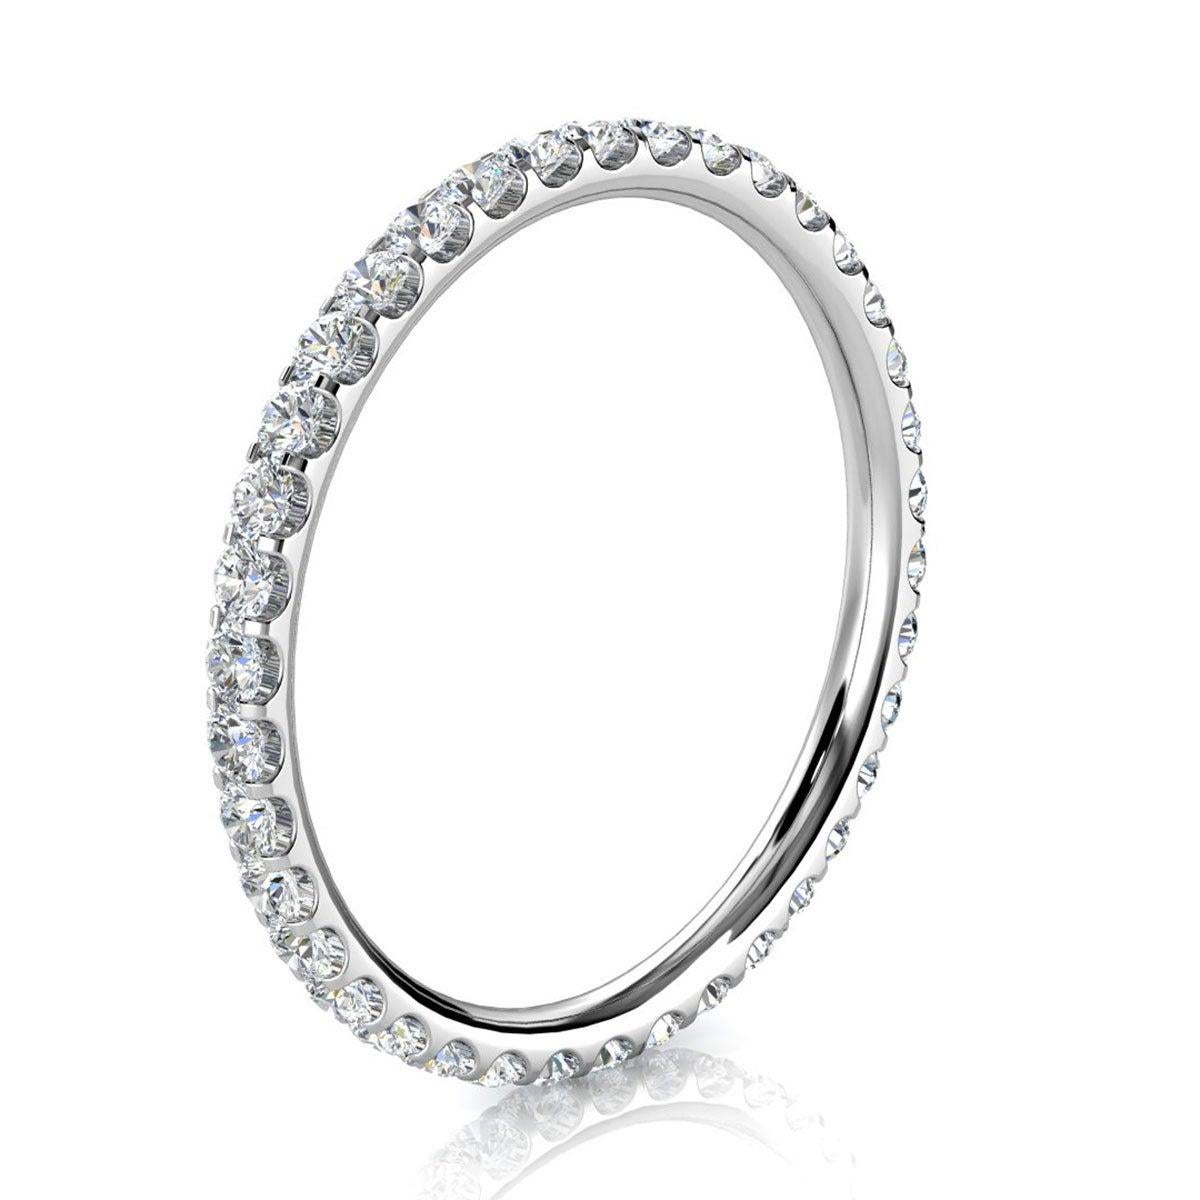 For Sale:  18k White Gold Viola Eternity Micro-Prong Diamond Ring '1/2 Ct. tw' 2